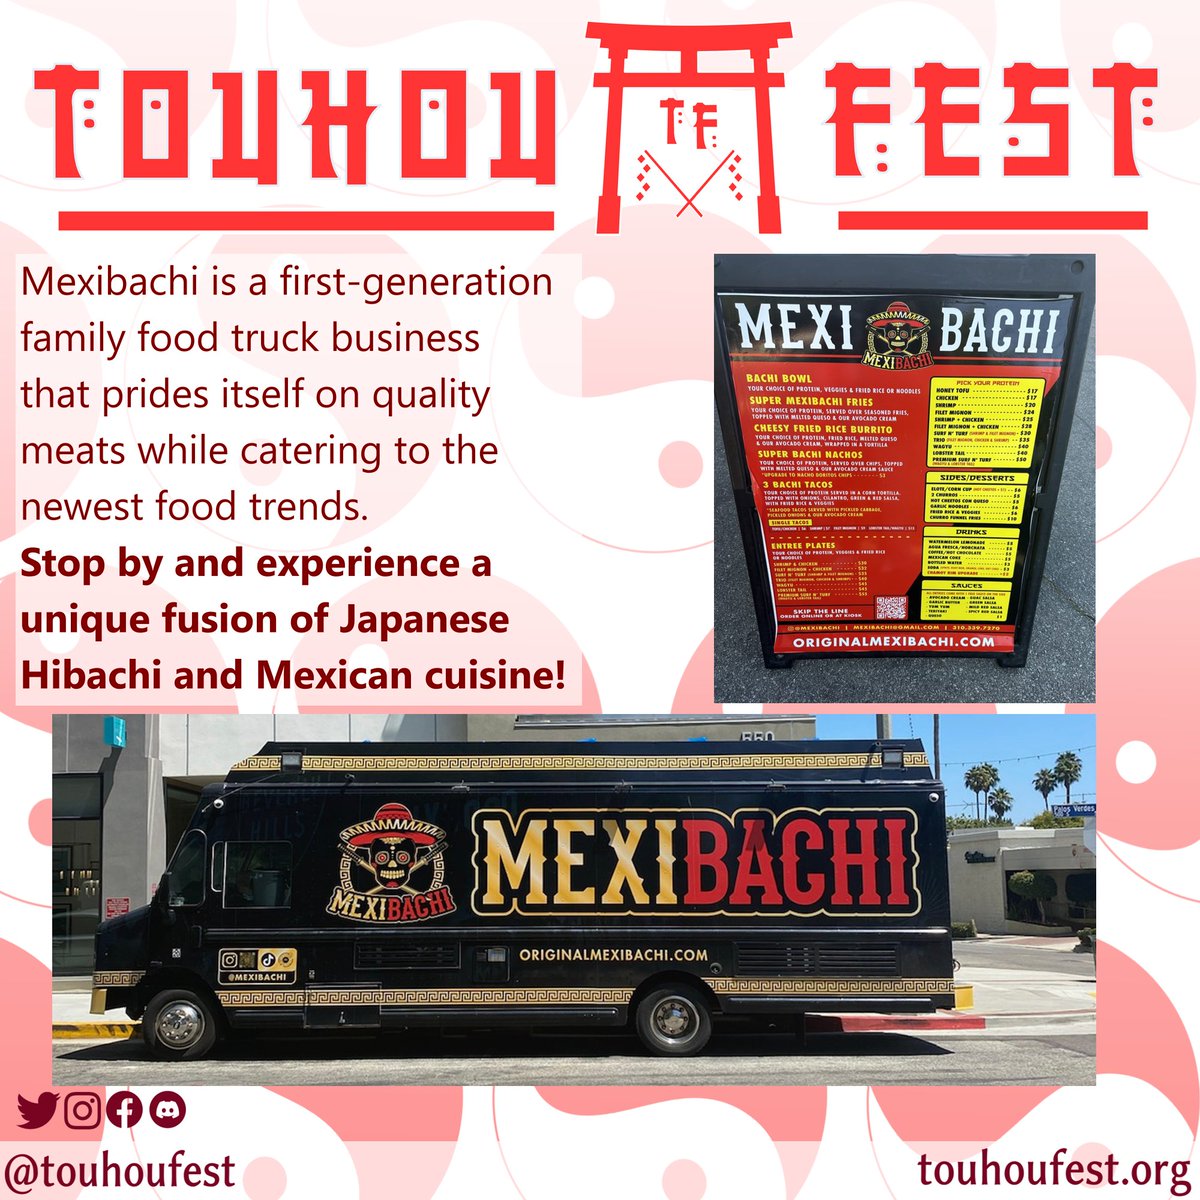 We're on the home stretch! @mexibachi is back to serve hungry TouhouFest guests! #foodtruck #touhouproject #touhoufest